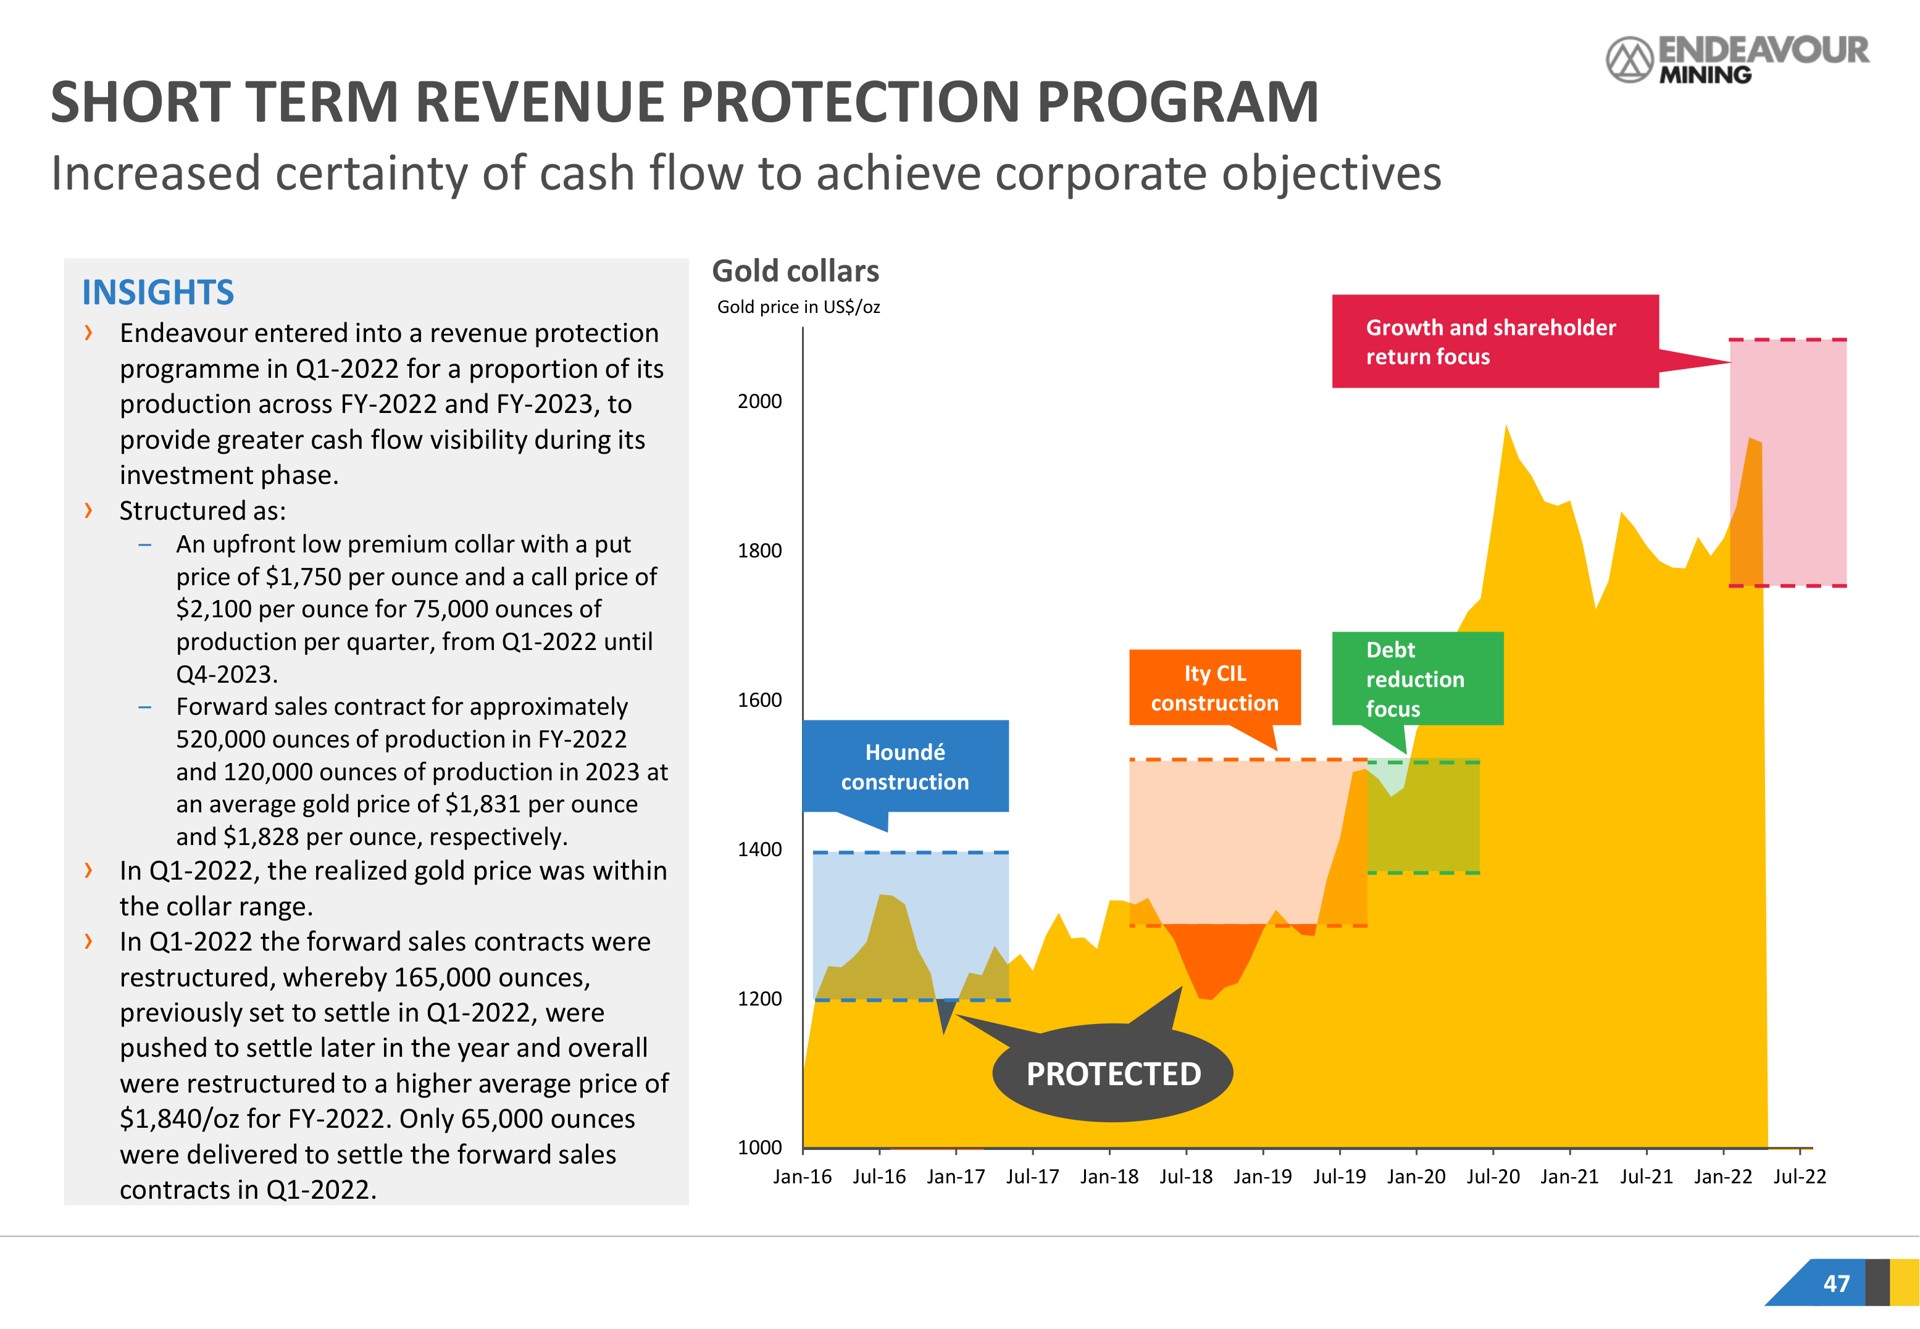 short term revenue protection program increased certainty of cash flow to achieve corporate objectives | Endeavour Mining